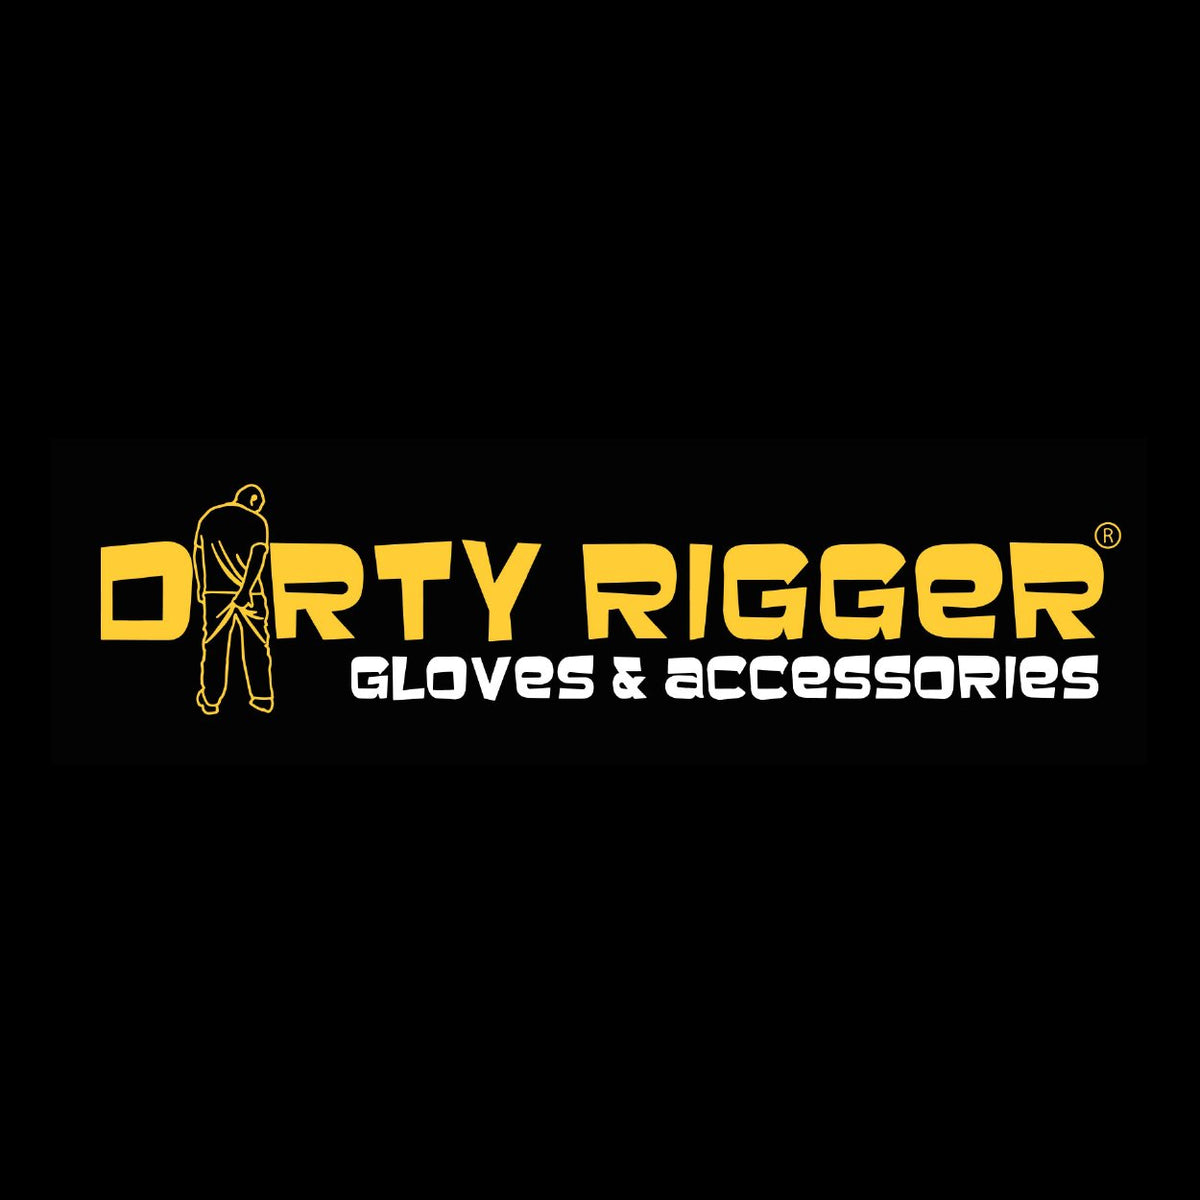 Dirty Rigger - Compact Utility Pouch - ShopWL